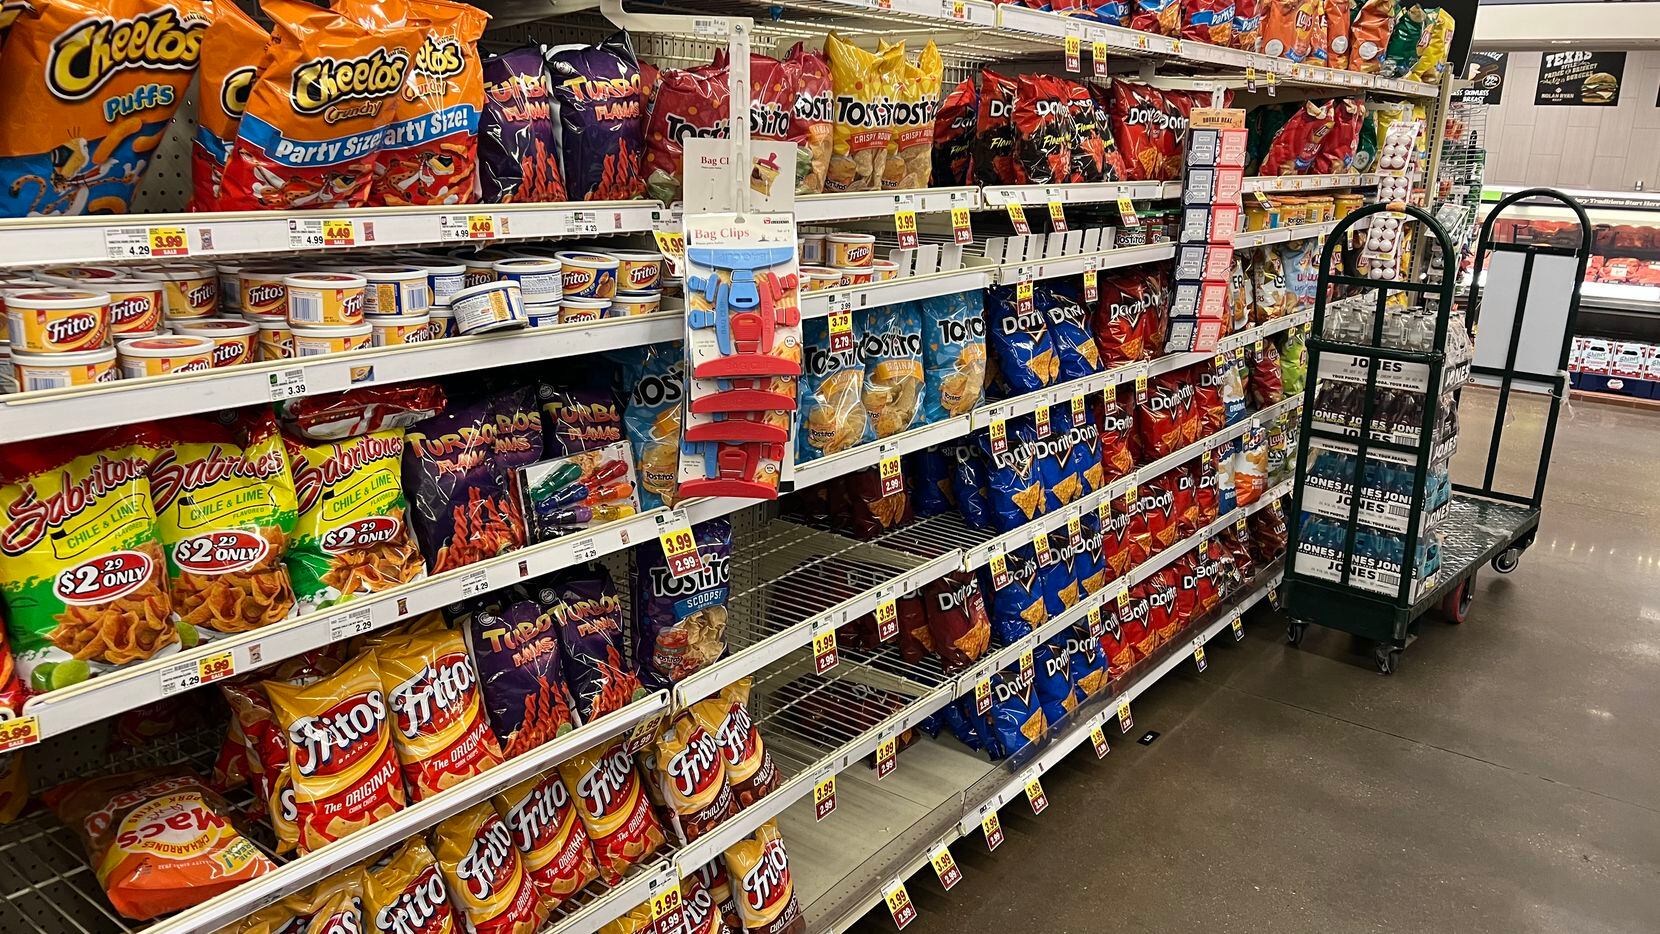 The snack foods aisle at Kroger in Oaklawn on March 2, 2022.